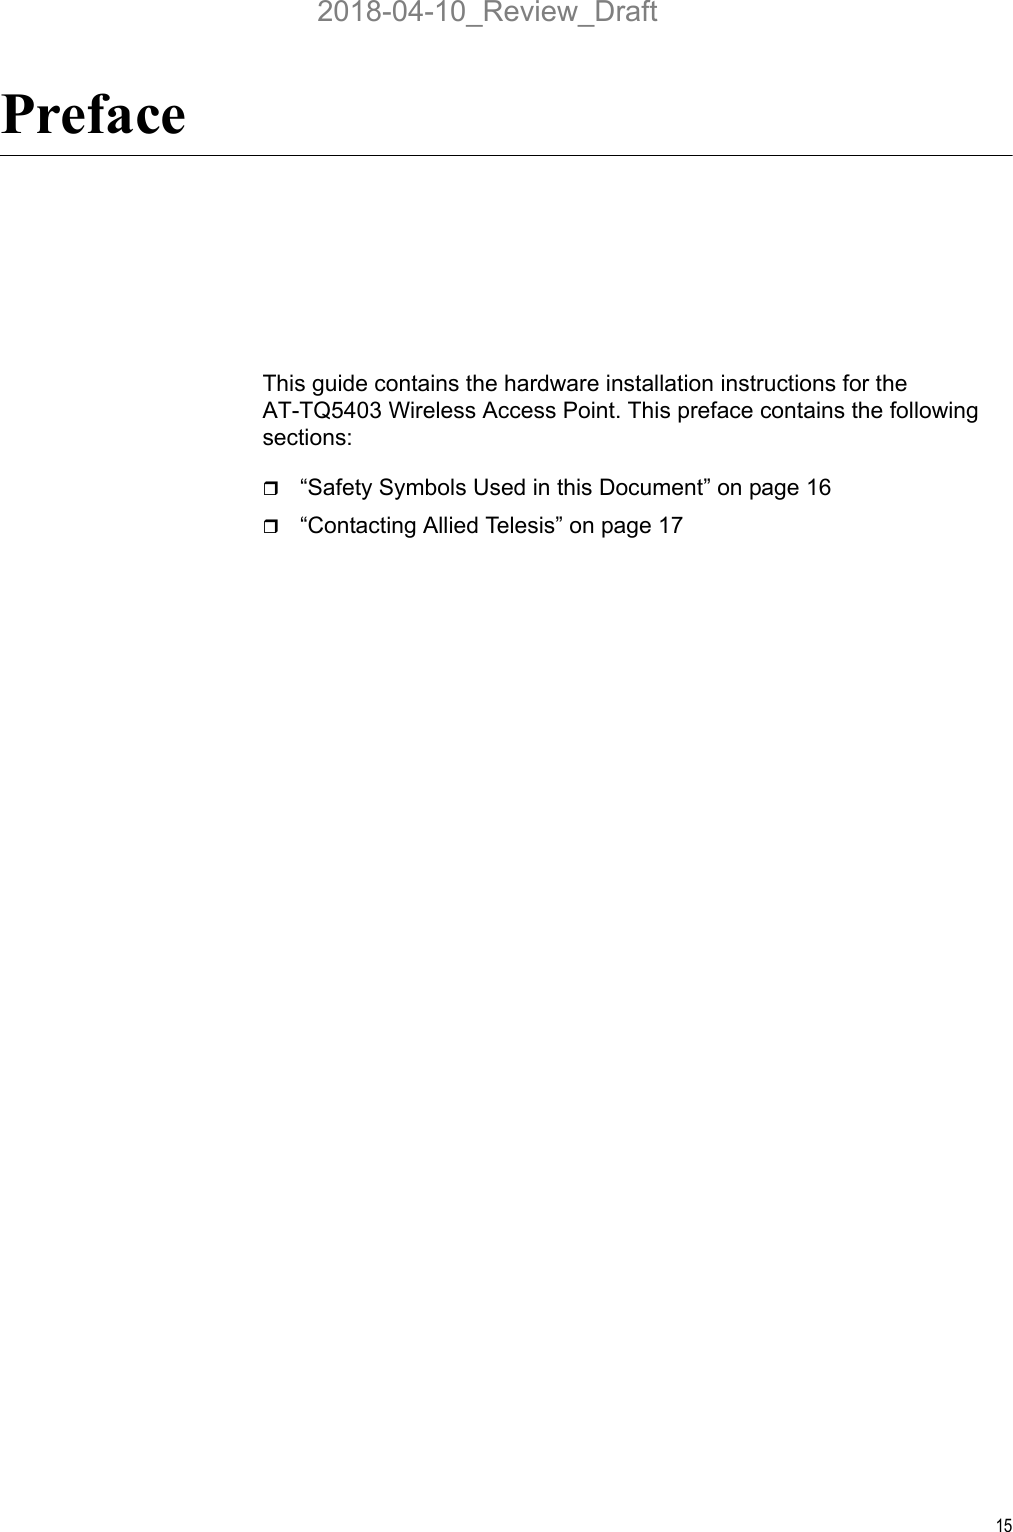 15PrefaceThis guide contains the hardware installation instructions for the AT-TQ5403 Wireless Access Point. This preface contains the following sections:“Safety Symbols Used in this Document” on page 16“Contacting Allied Telesis” on page 172018-04-10_Review_Draft